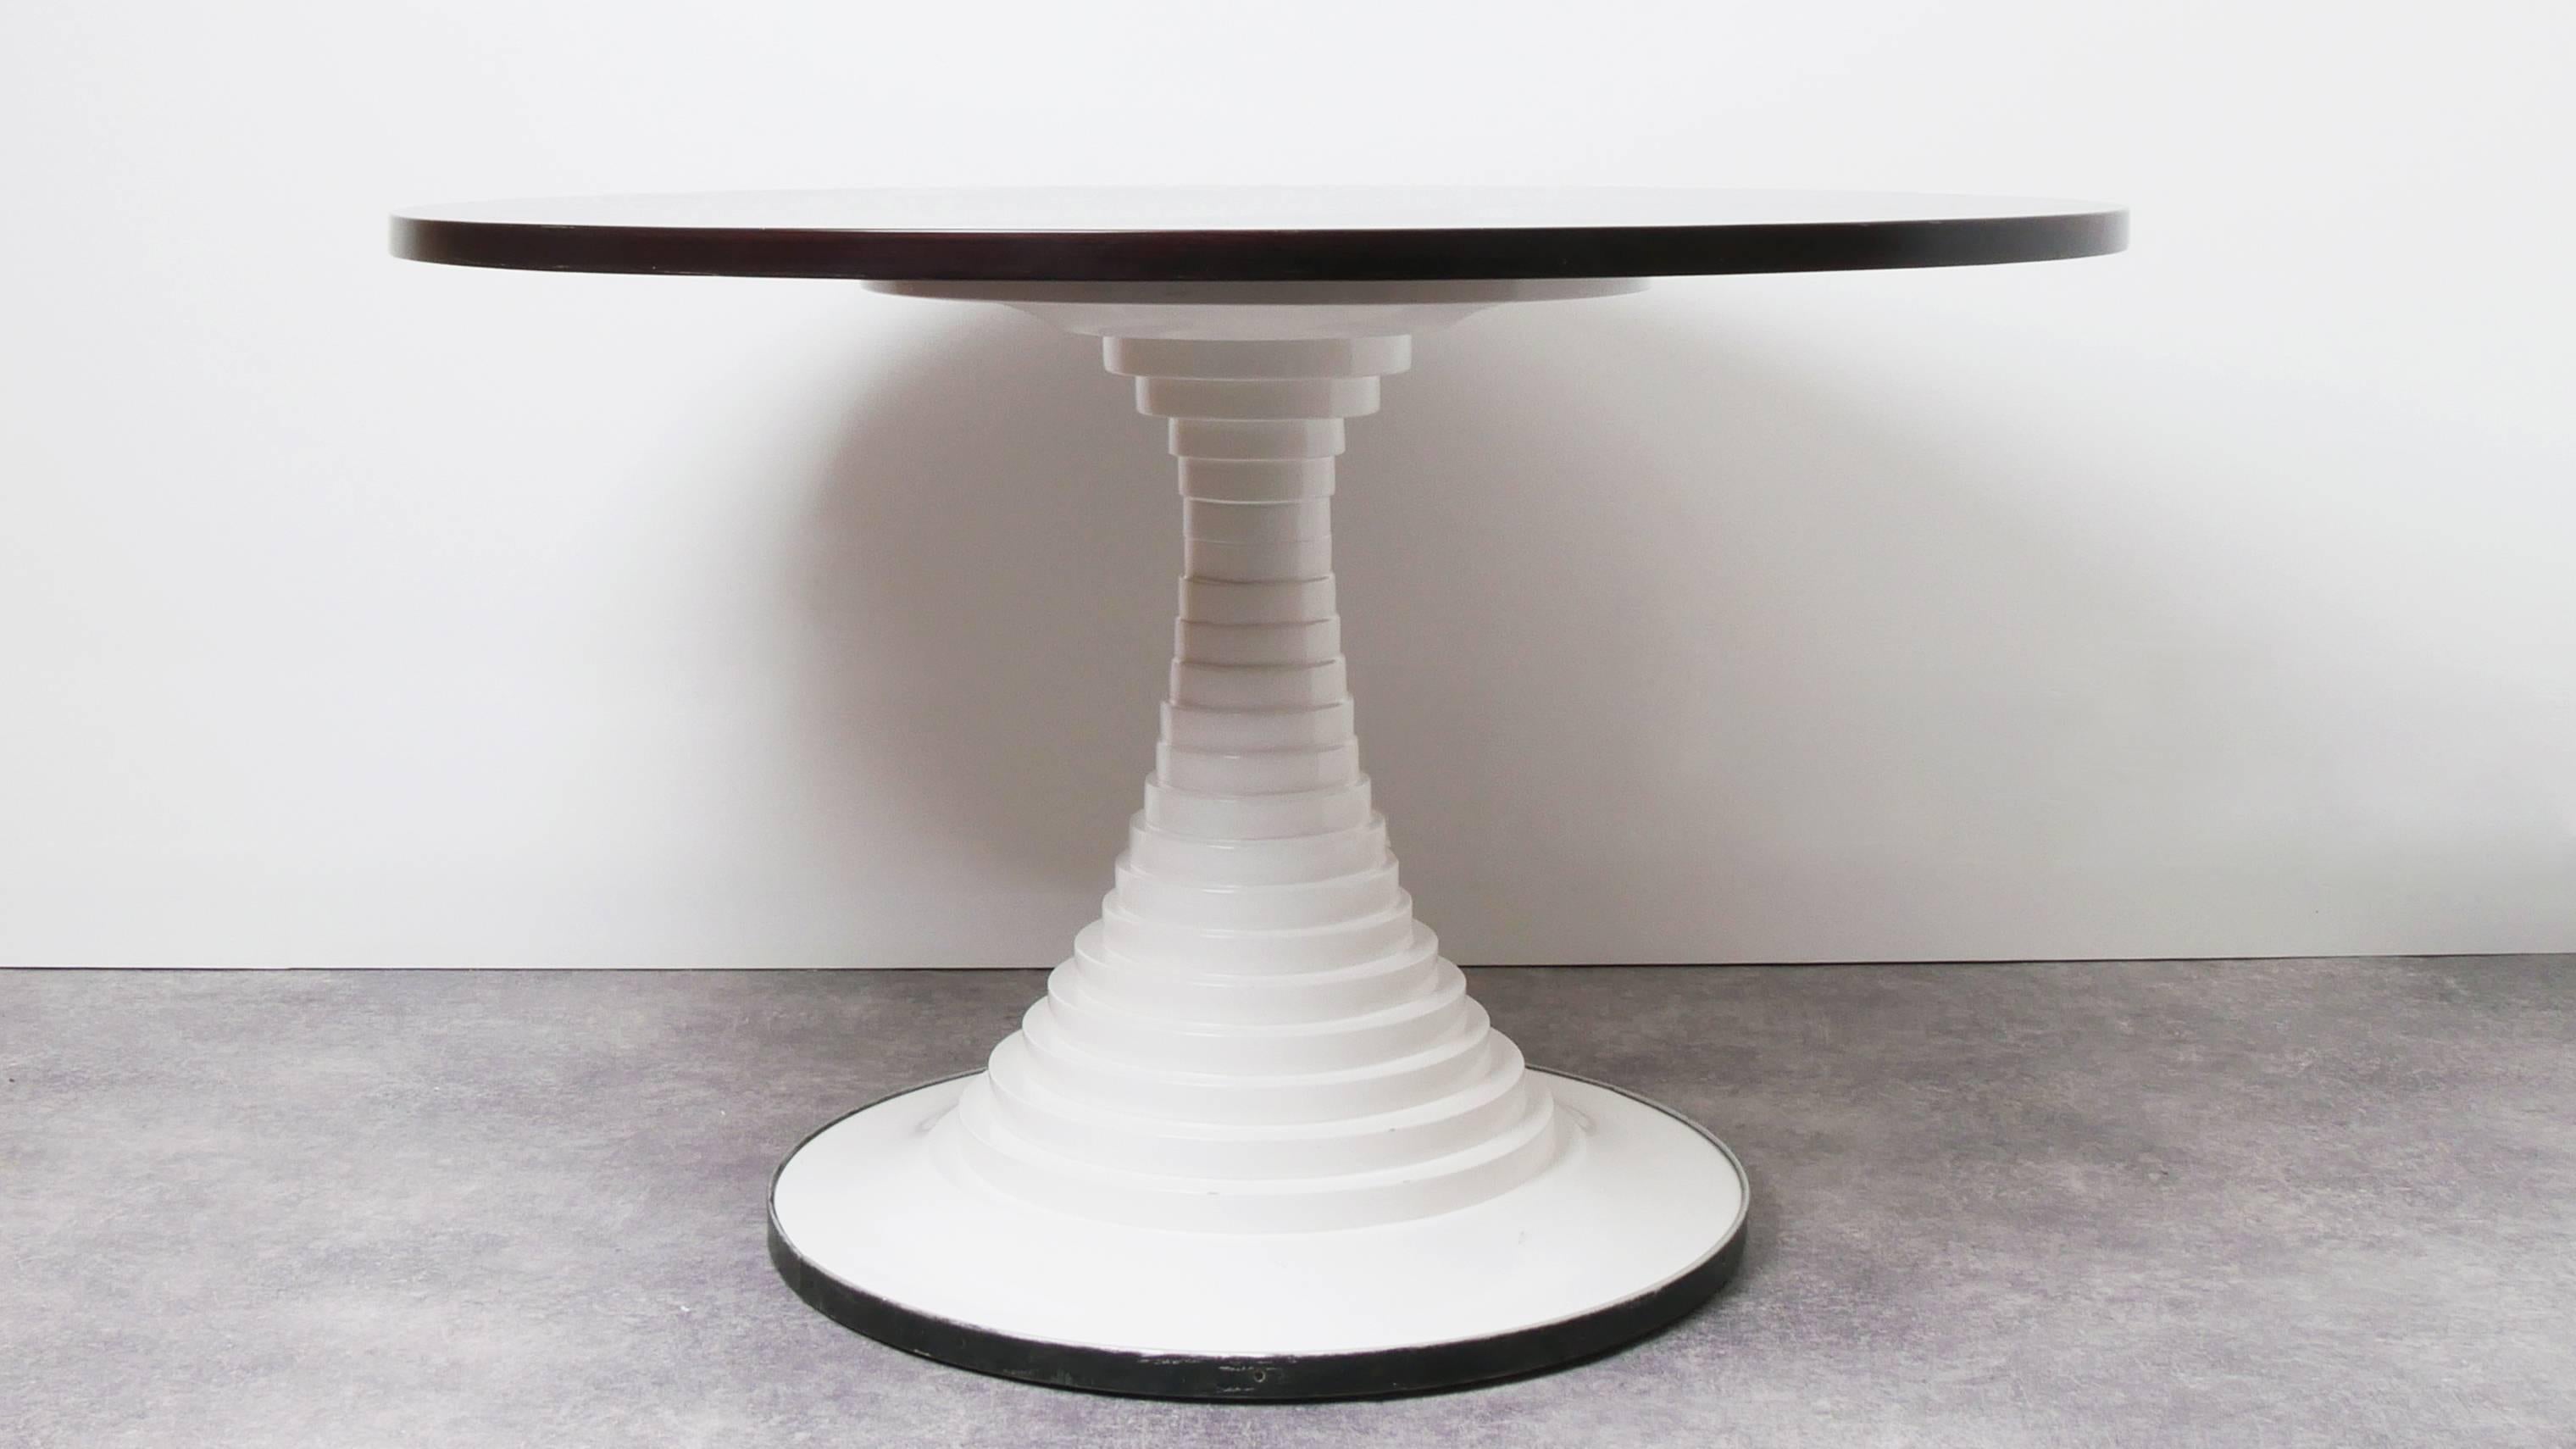 Carlo de Carli rosewood table for Sormani with a white lacquered wooden base. The top of the table is very smooth and in very good conditions.